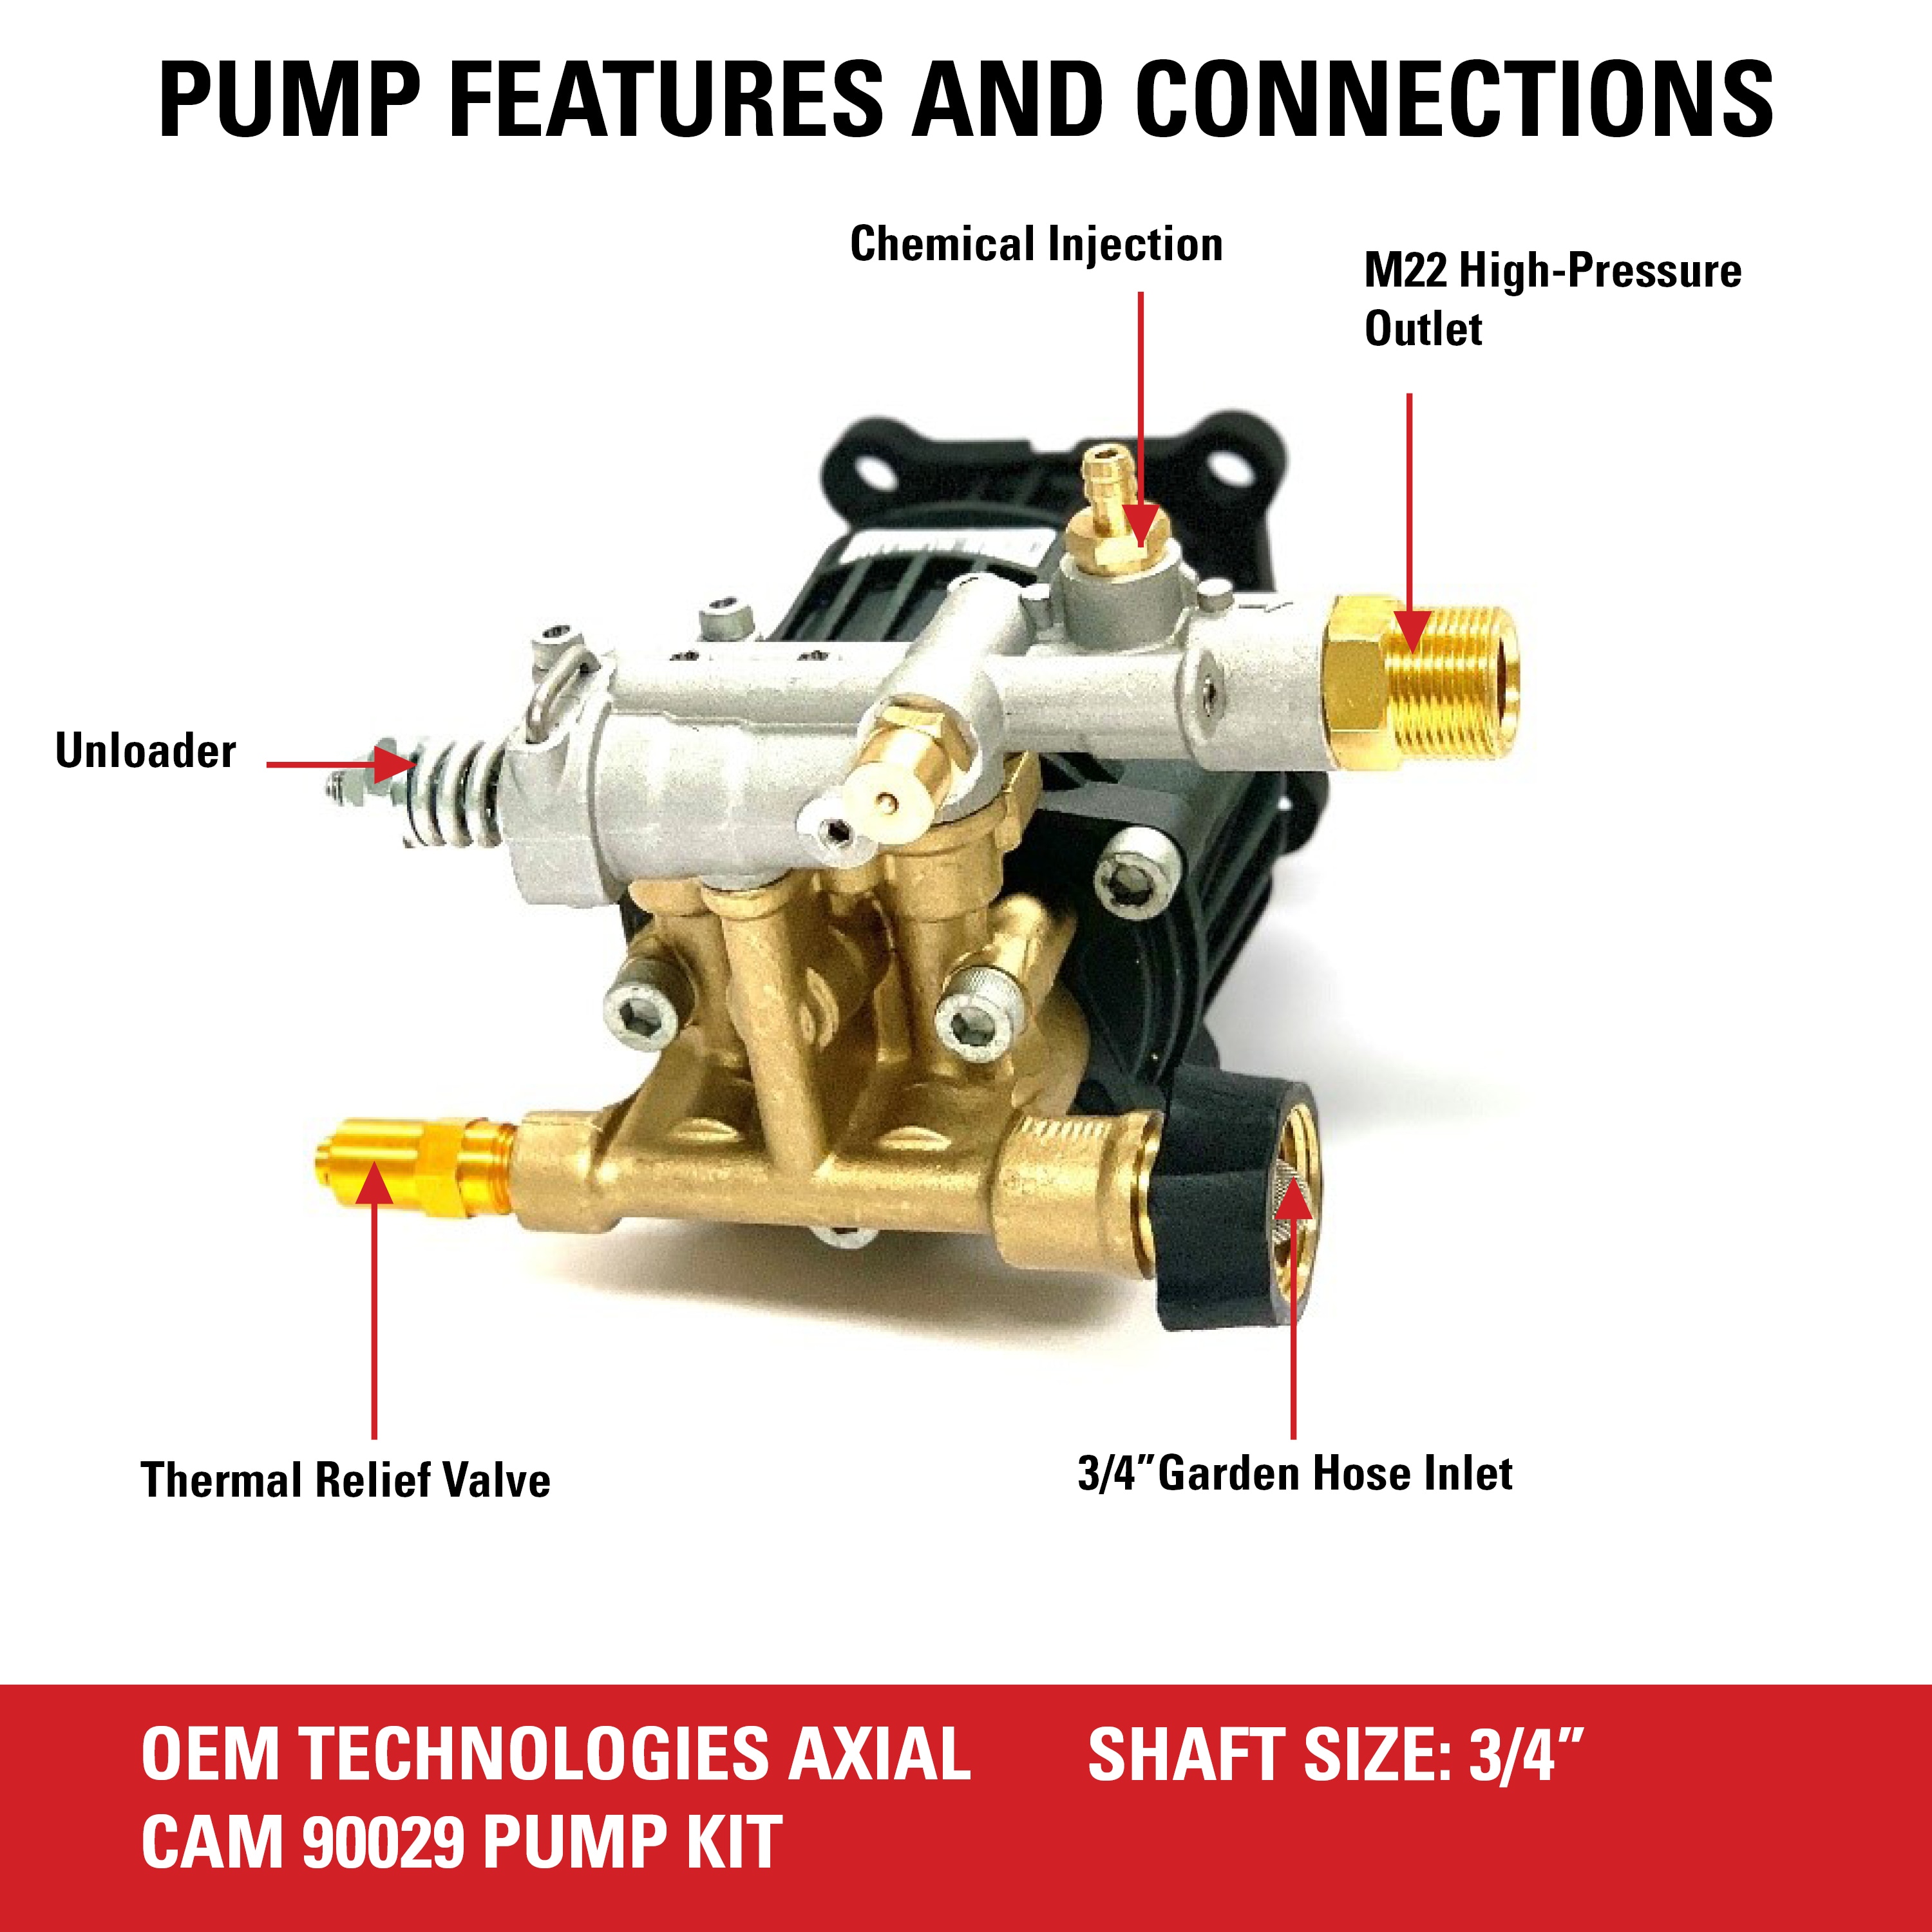 SIMPSON OEM Technologies 3400 PSI at 2.5 GPM Axial Cam Pump Kit